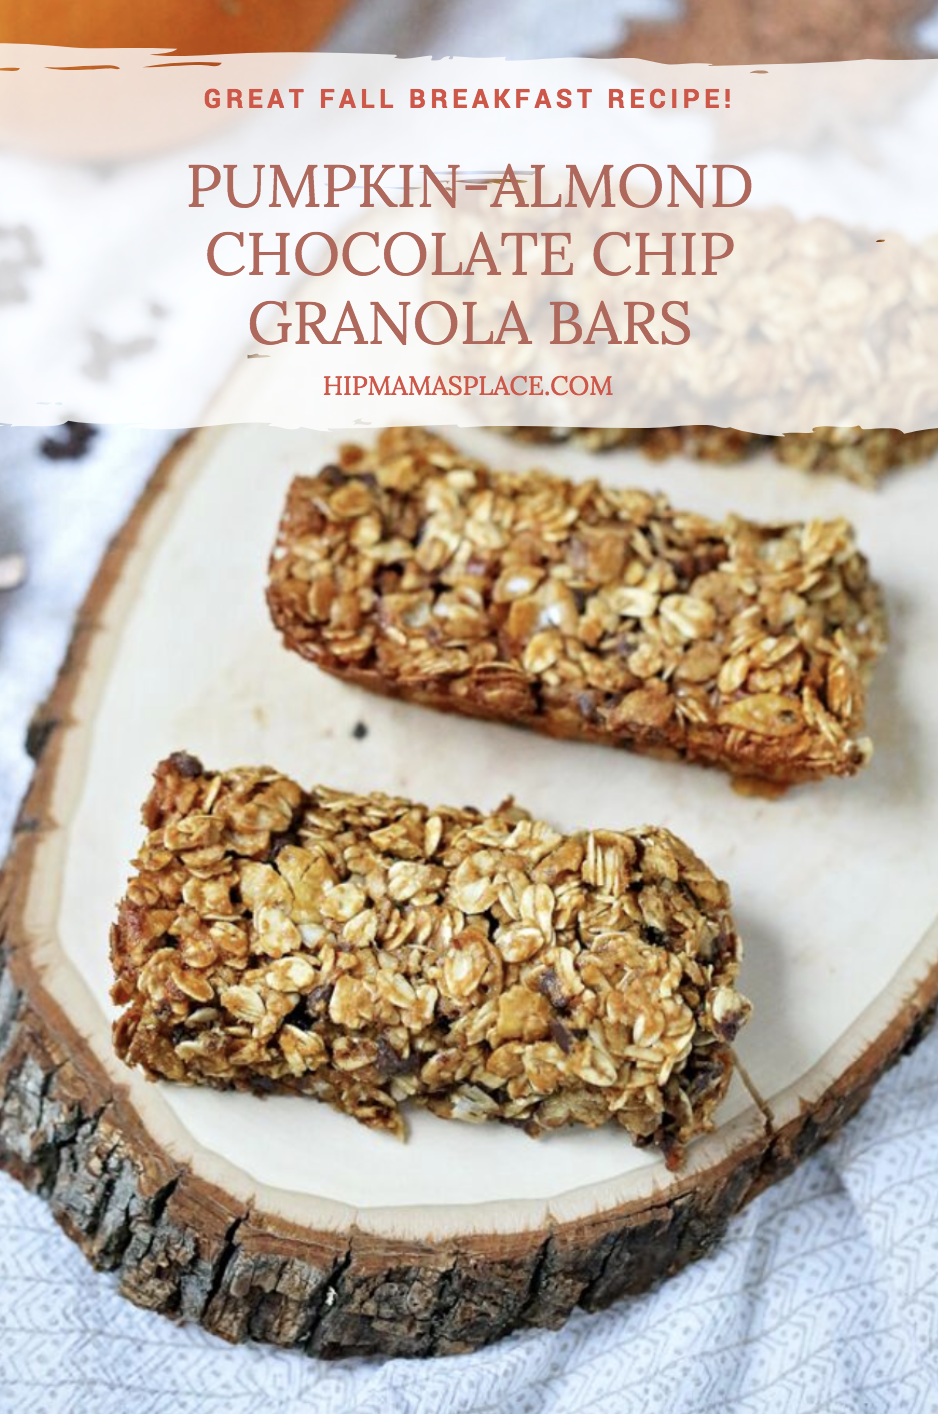 Fall is here! Make these easy and delicious Pumpkin-Almond Chocolate Chip Granola Bars! 